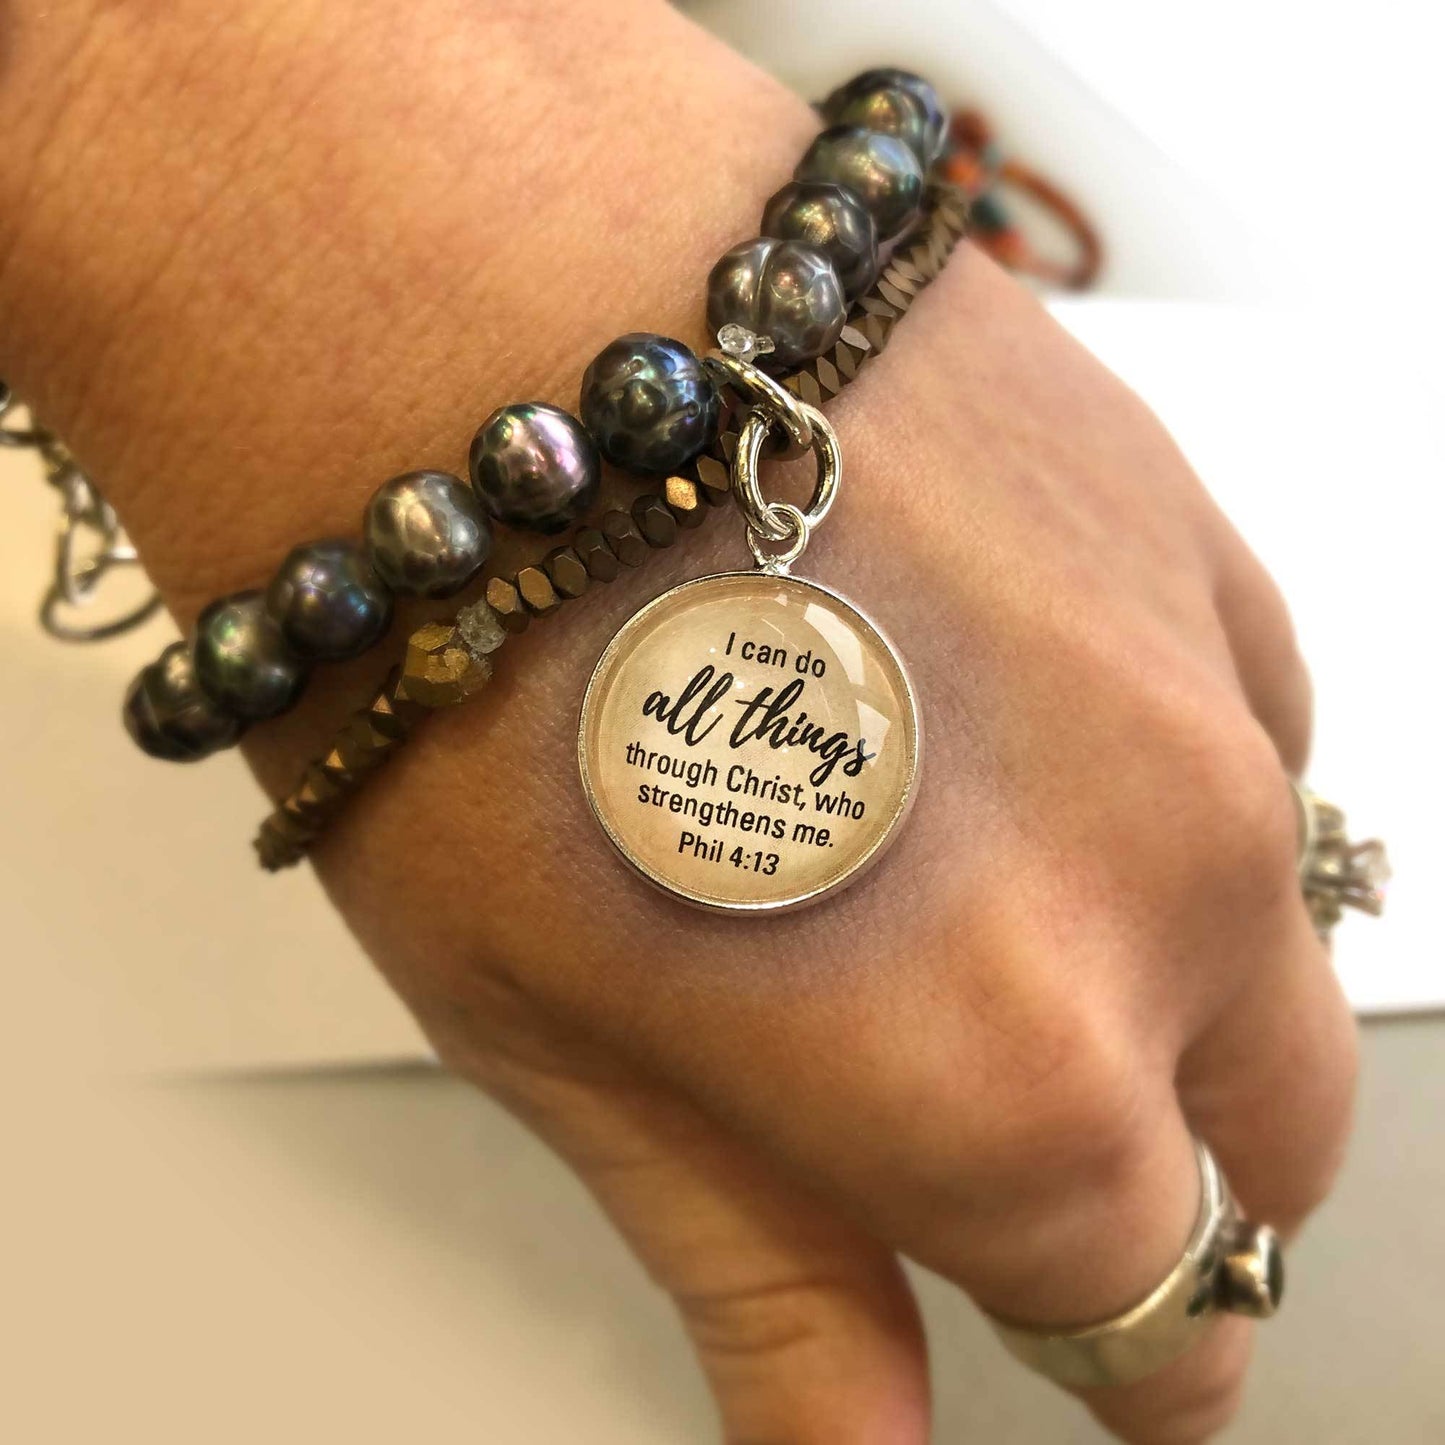 "I Can Do All Things Through Christ" Phil 4:13 Scripture Charm for